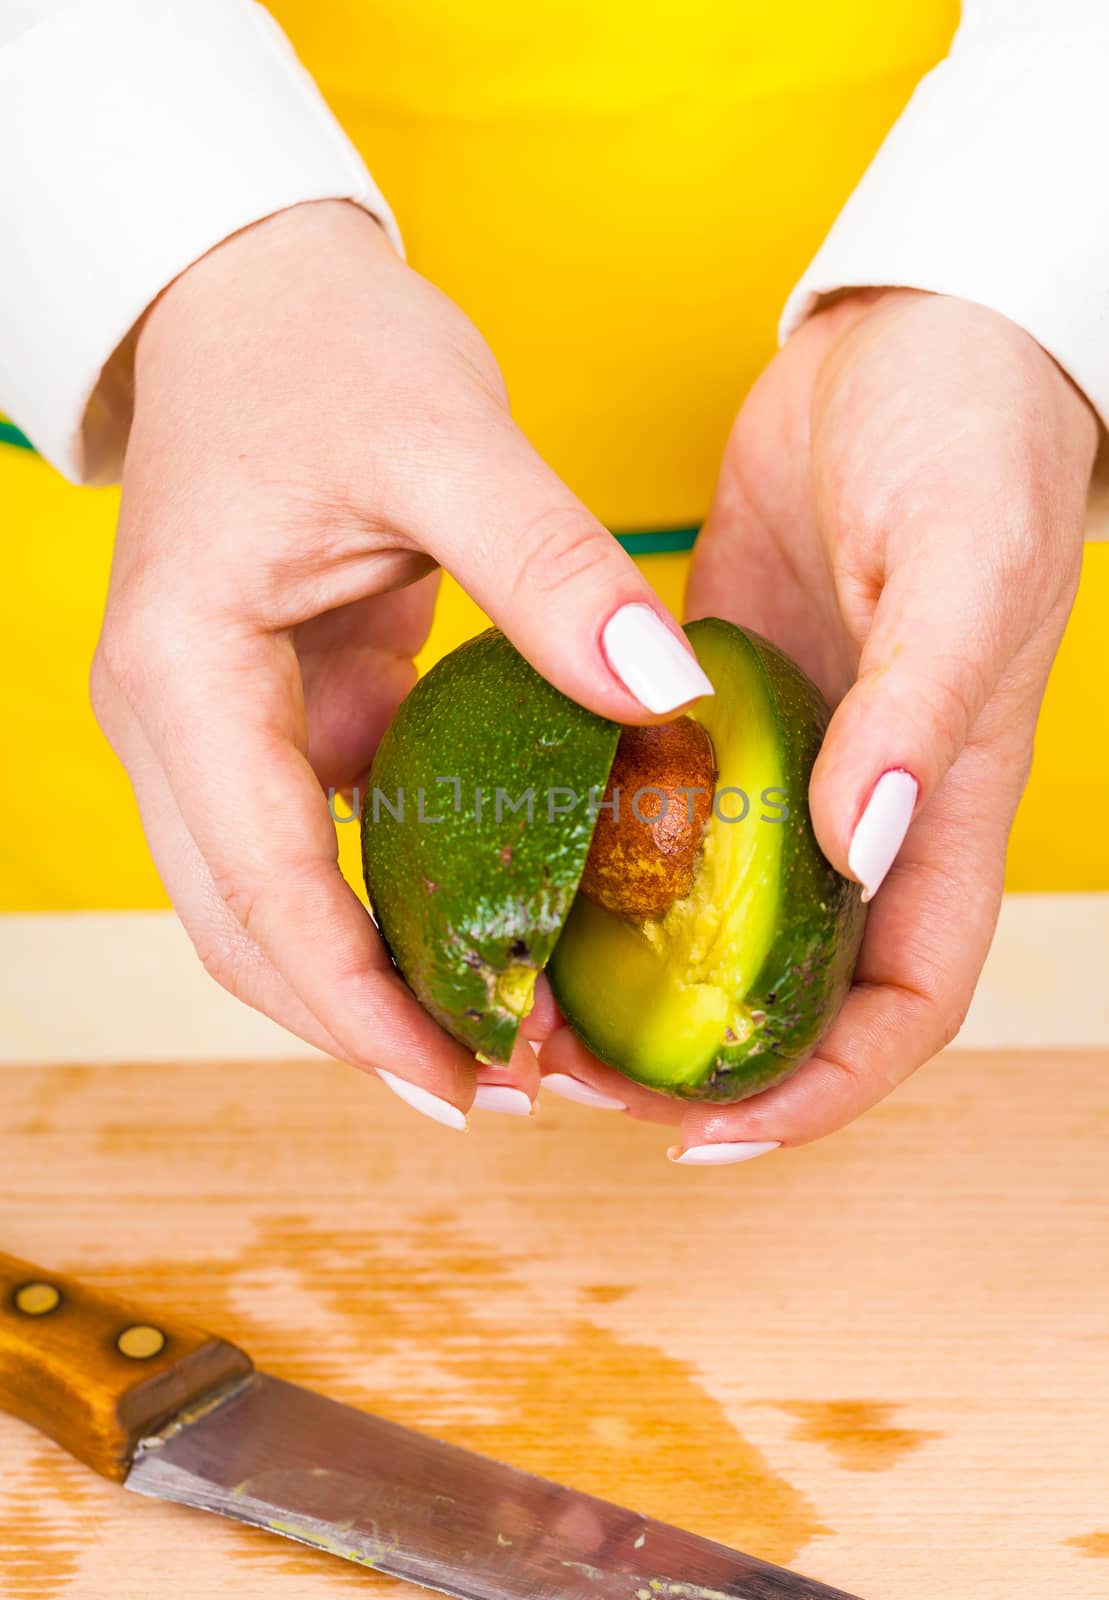 separates avocado into two parts  by MegaArt